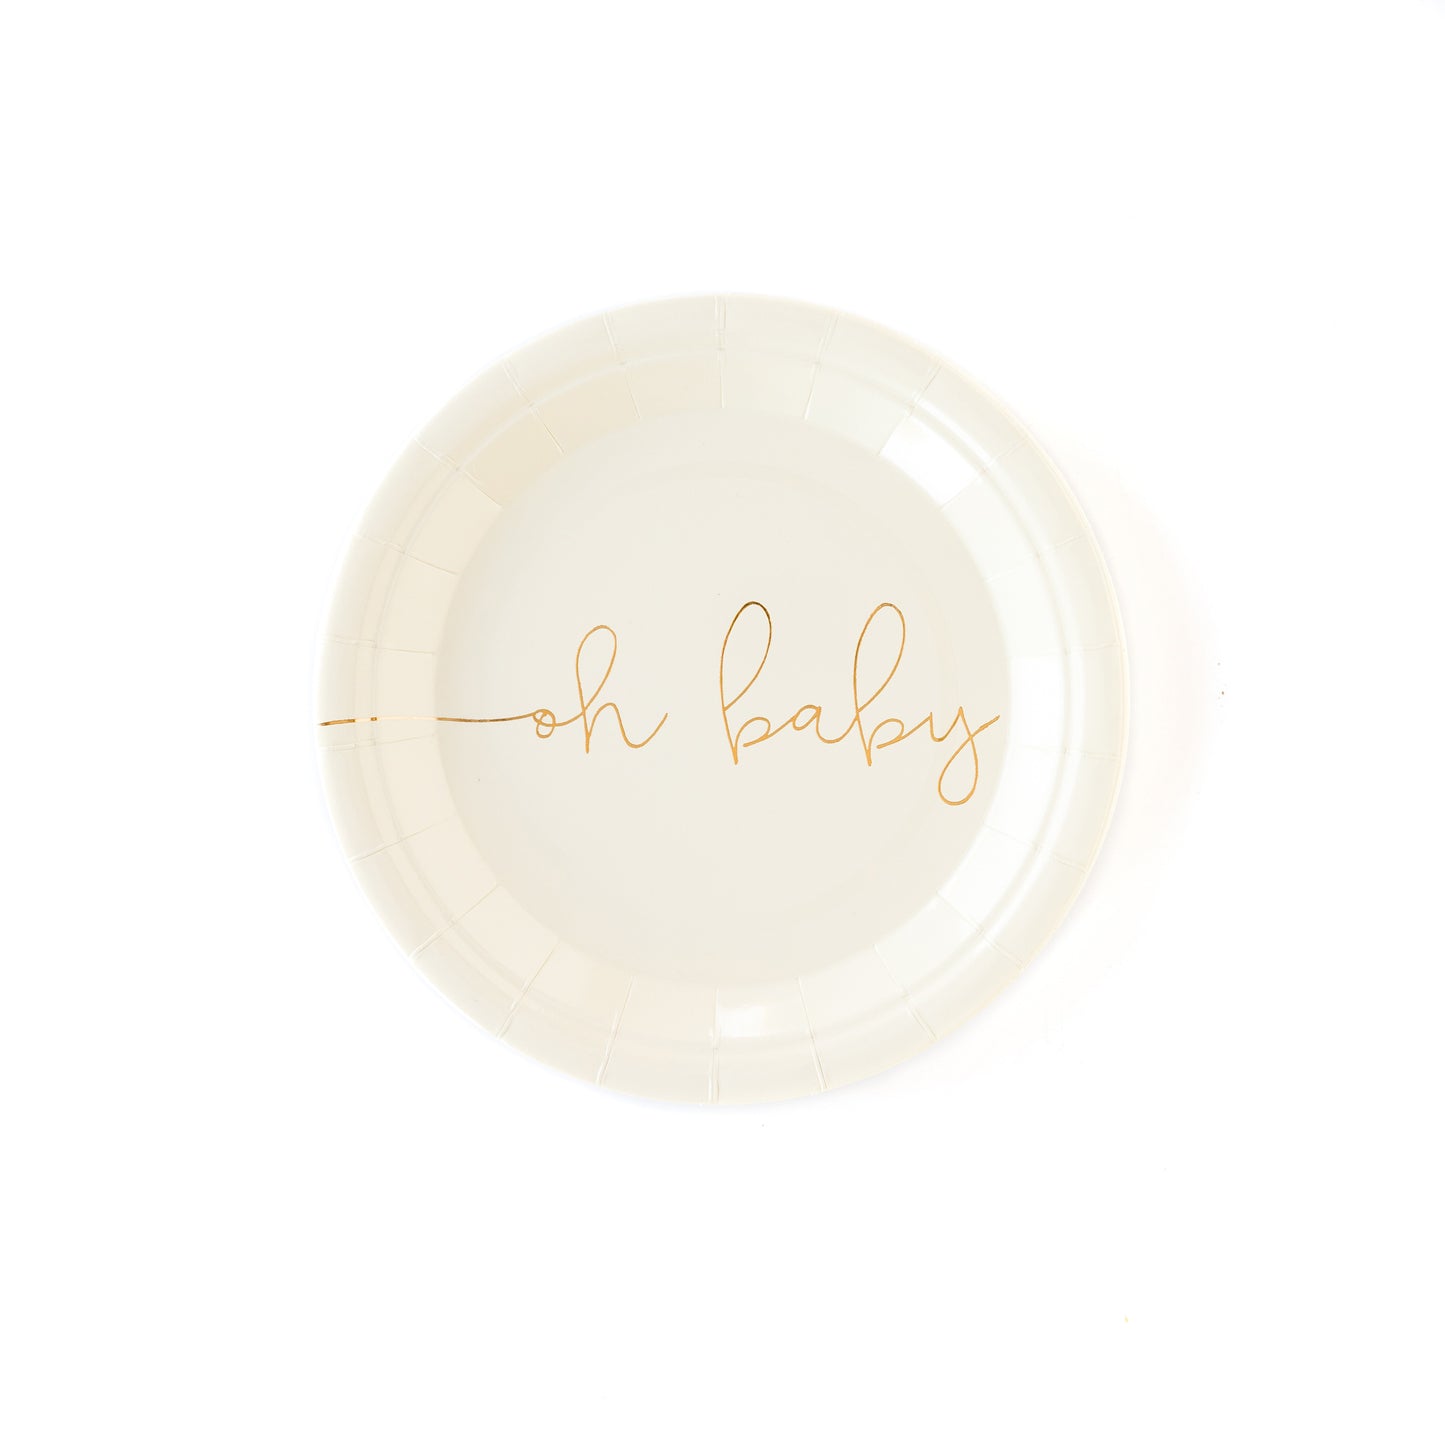 Oh Baby Small Plates (8 pk)